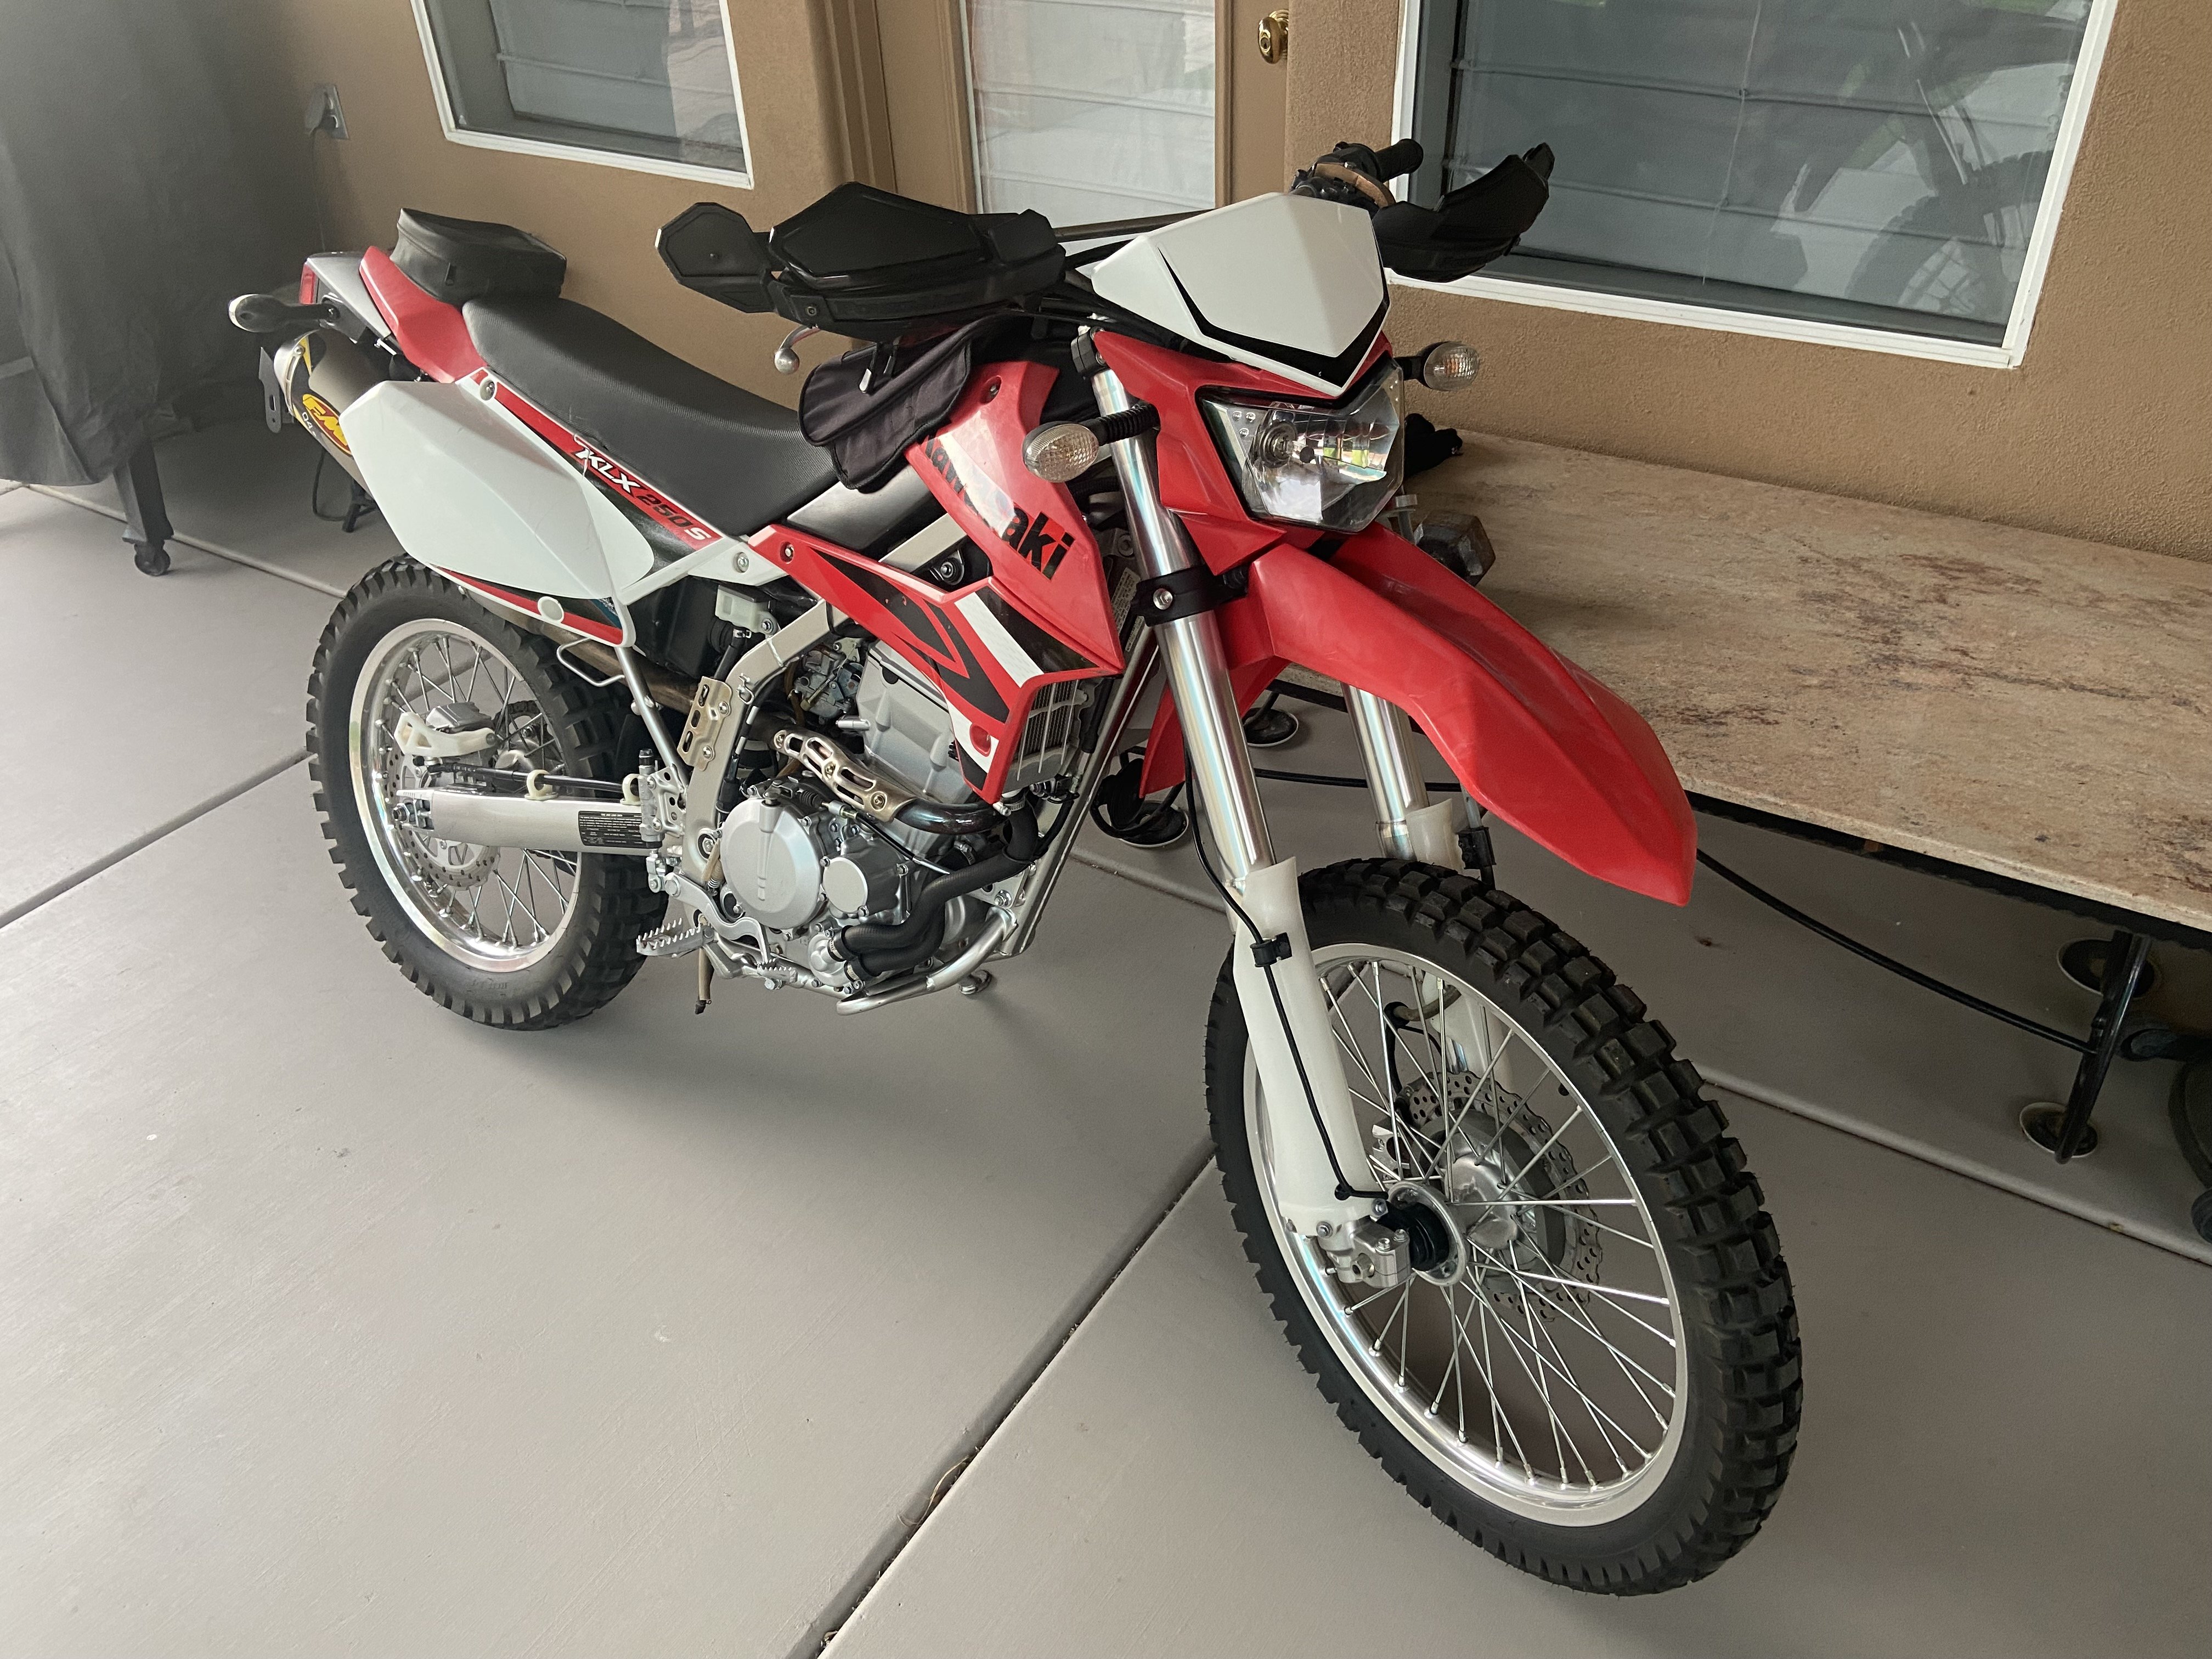 2009 Kawasaki KLX250S - Classified Ads - CouesWhitetail.com Discussion ...